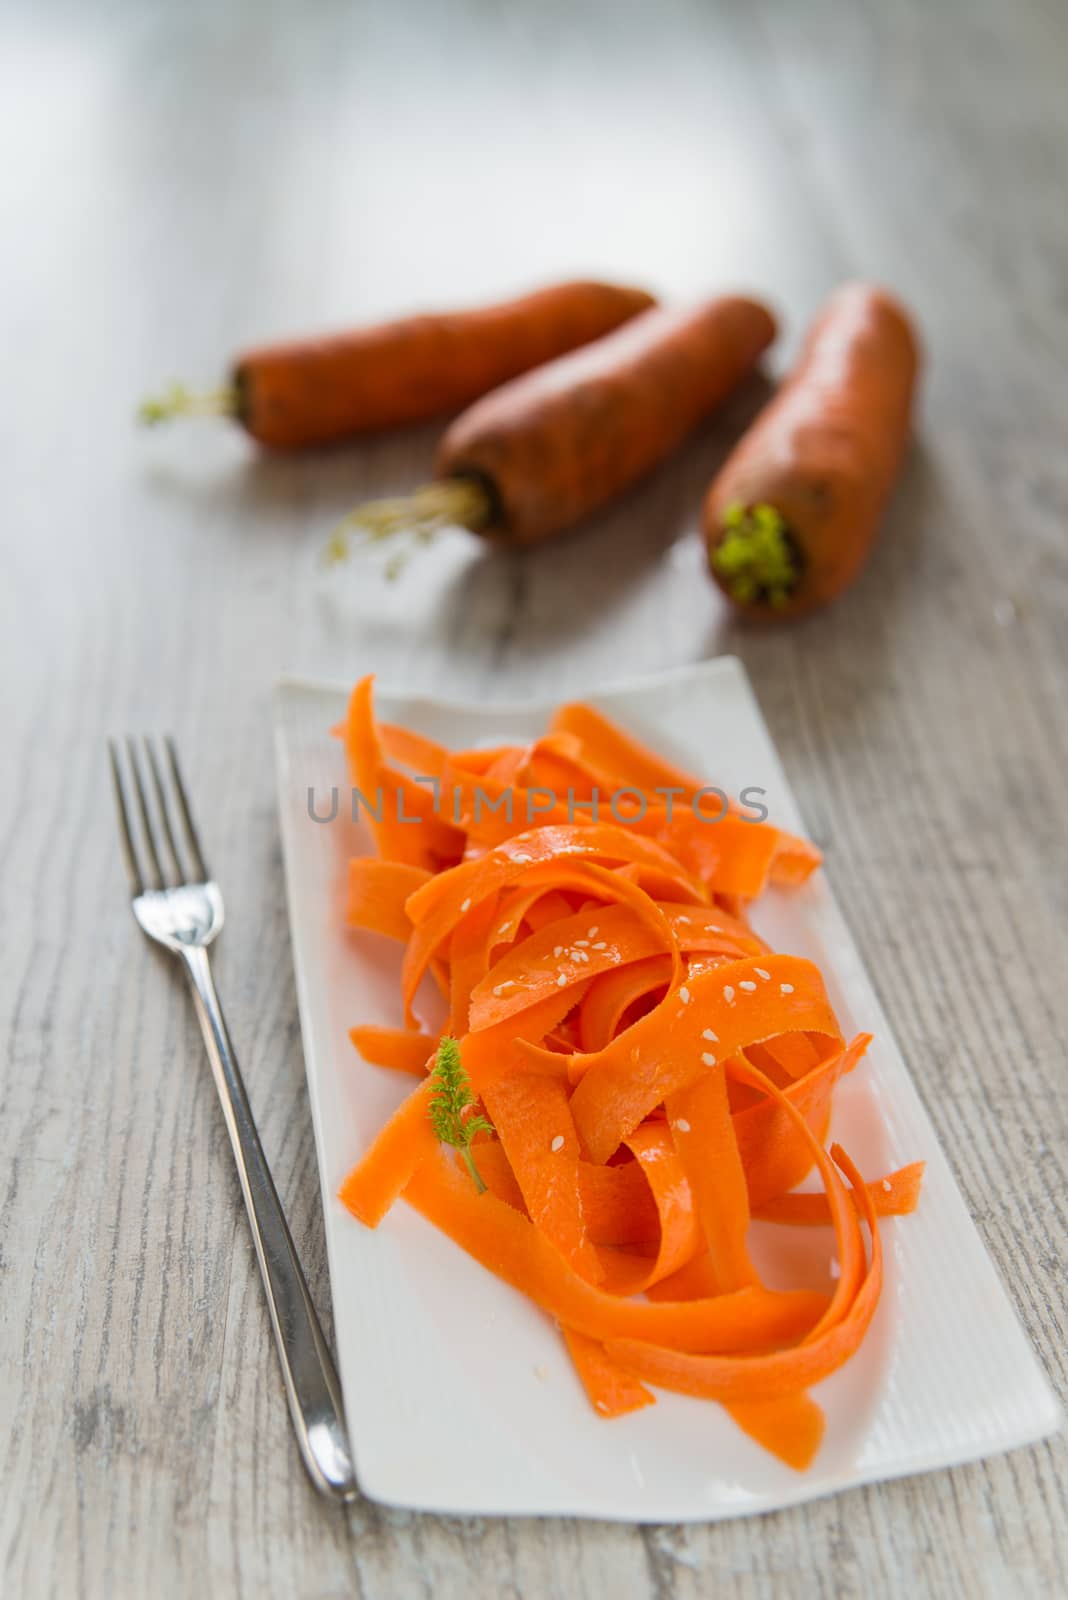 Carrot salad on the white plate by Linaga